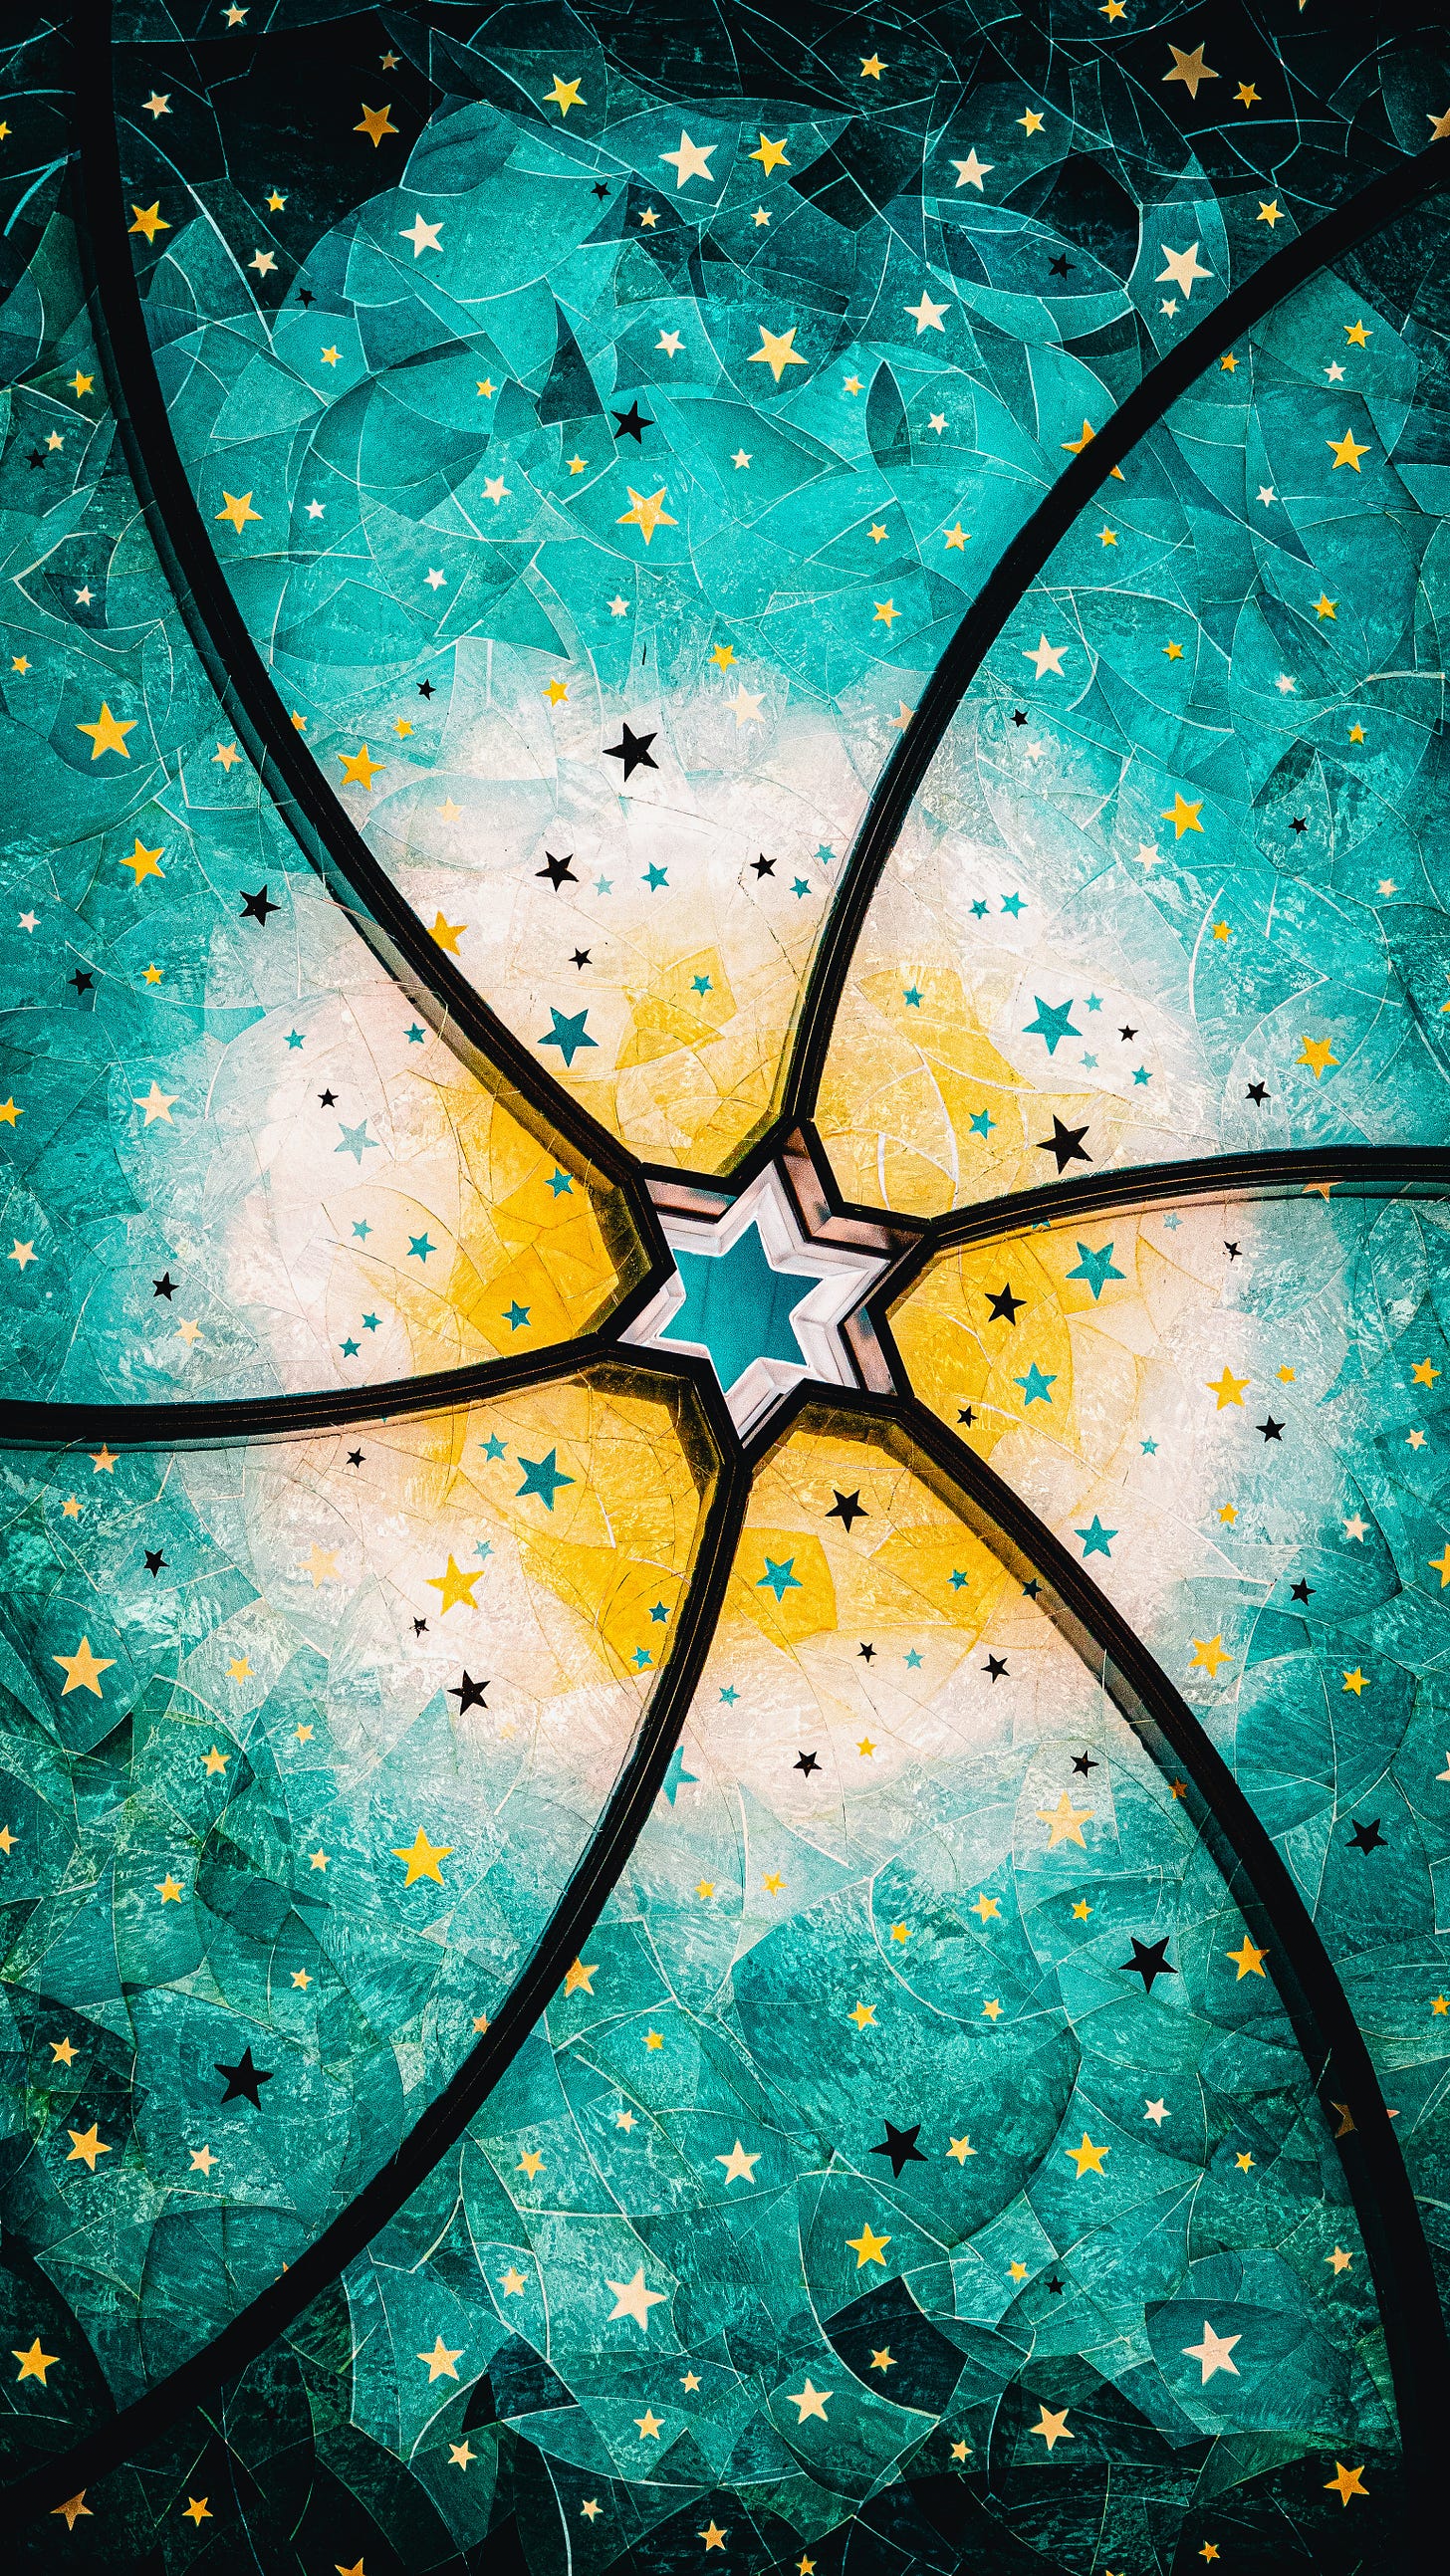 Tourquoise Jewish star, framed in white, outlined in black. Lines pointing from each star point. Against a colorful, patterned background of yellow, cream, tourquoise, and black, with five pointed yellow stars dotted through out.